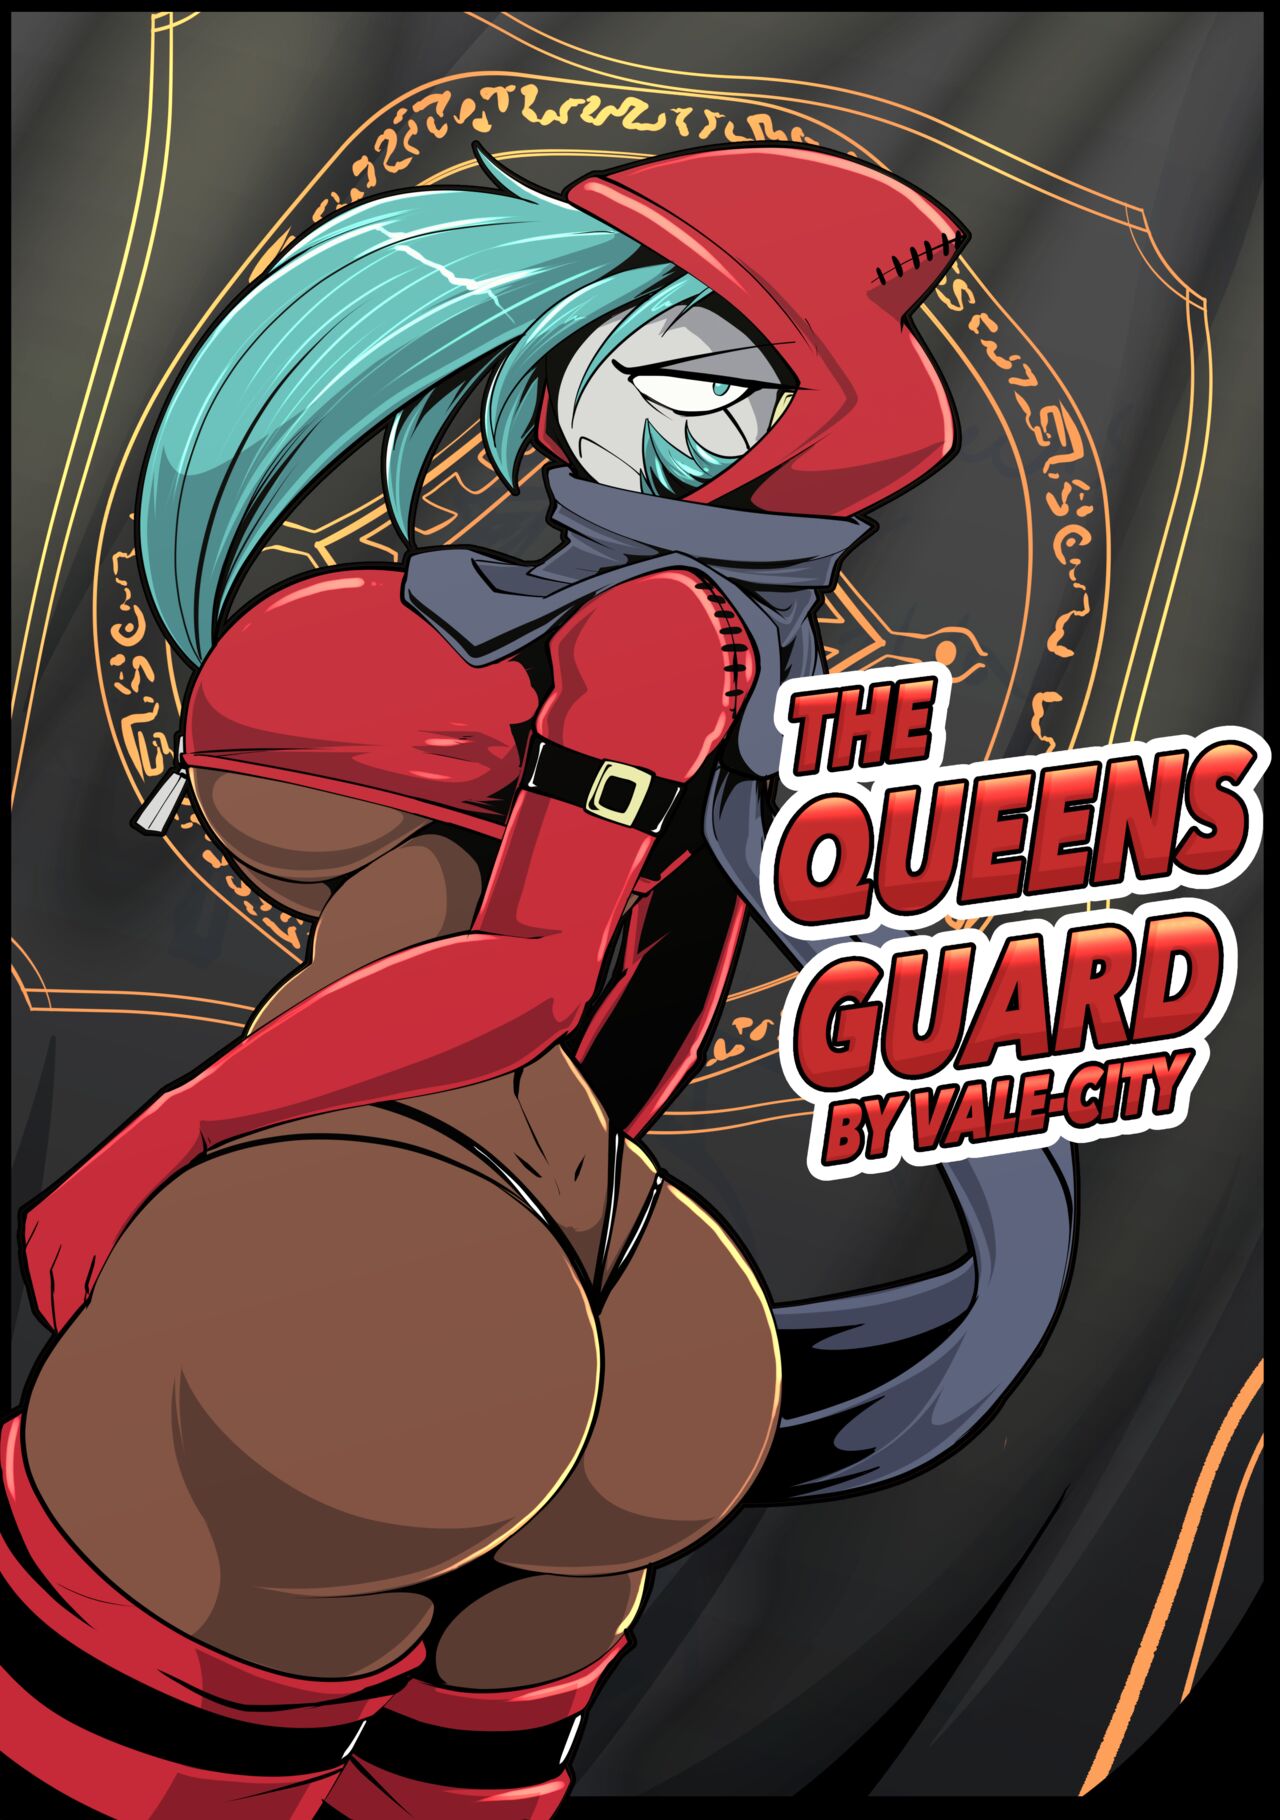 The QUEEN GUARD